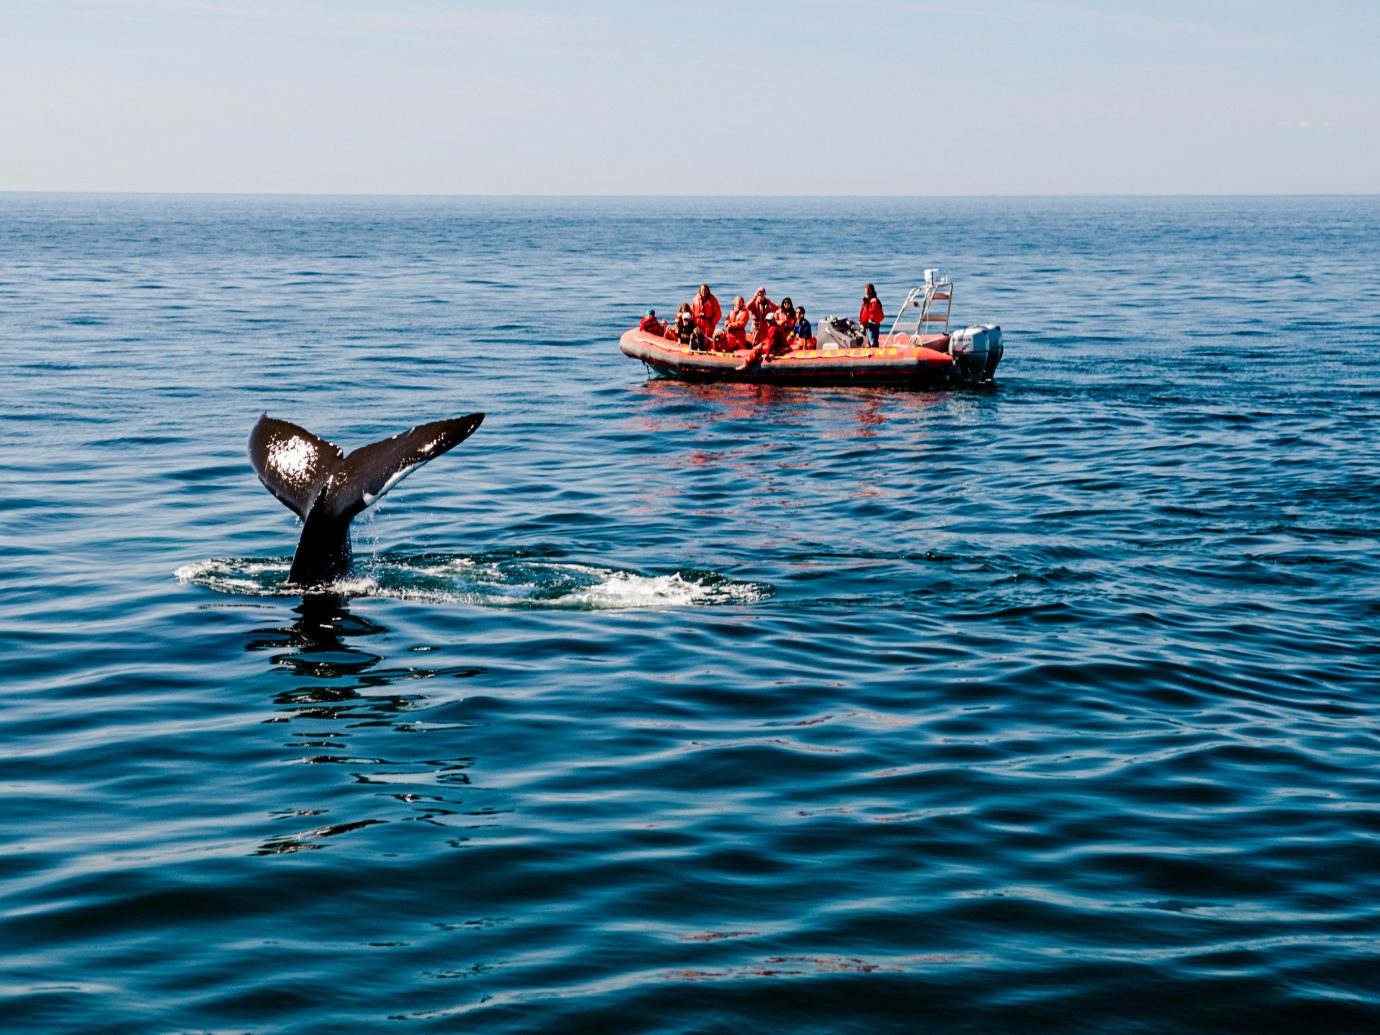 Trip Ideas water sky outdoor Boat Sea Ocean marine mammal whales dolphins and porpoises vehicle Coast boating aquatic mammal bay dolphin swimming